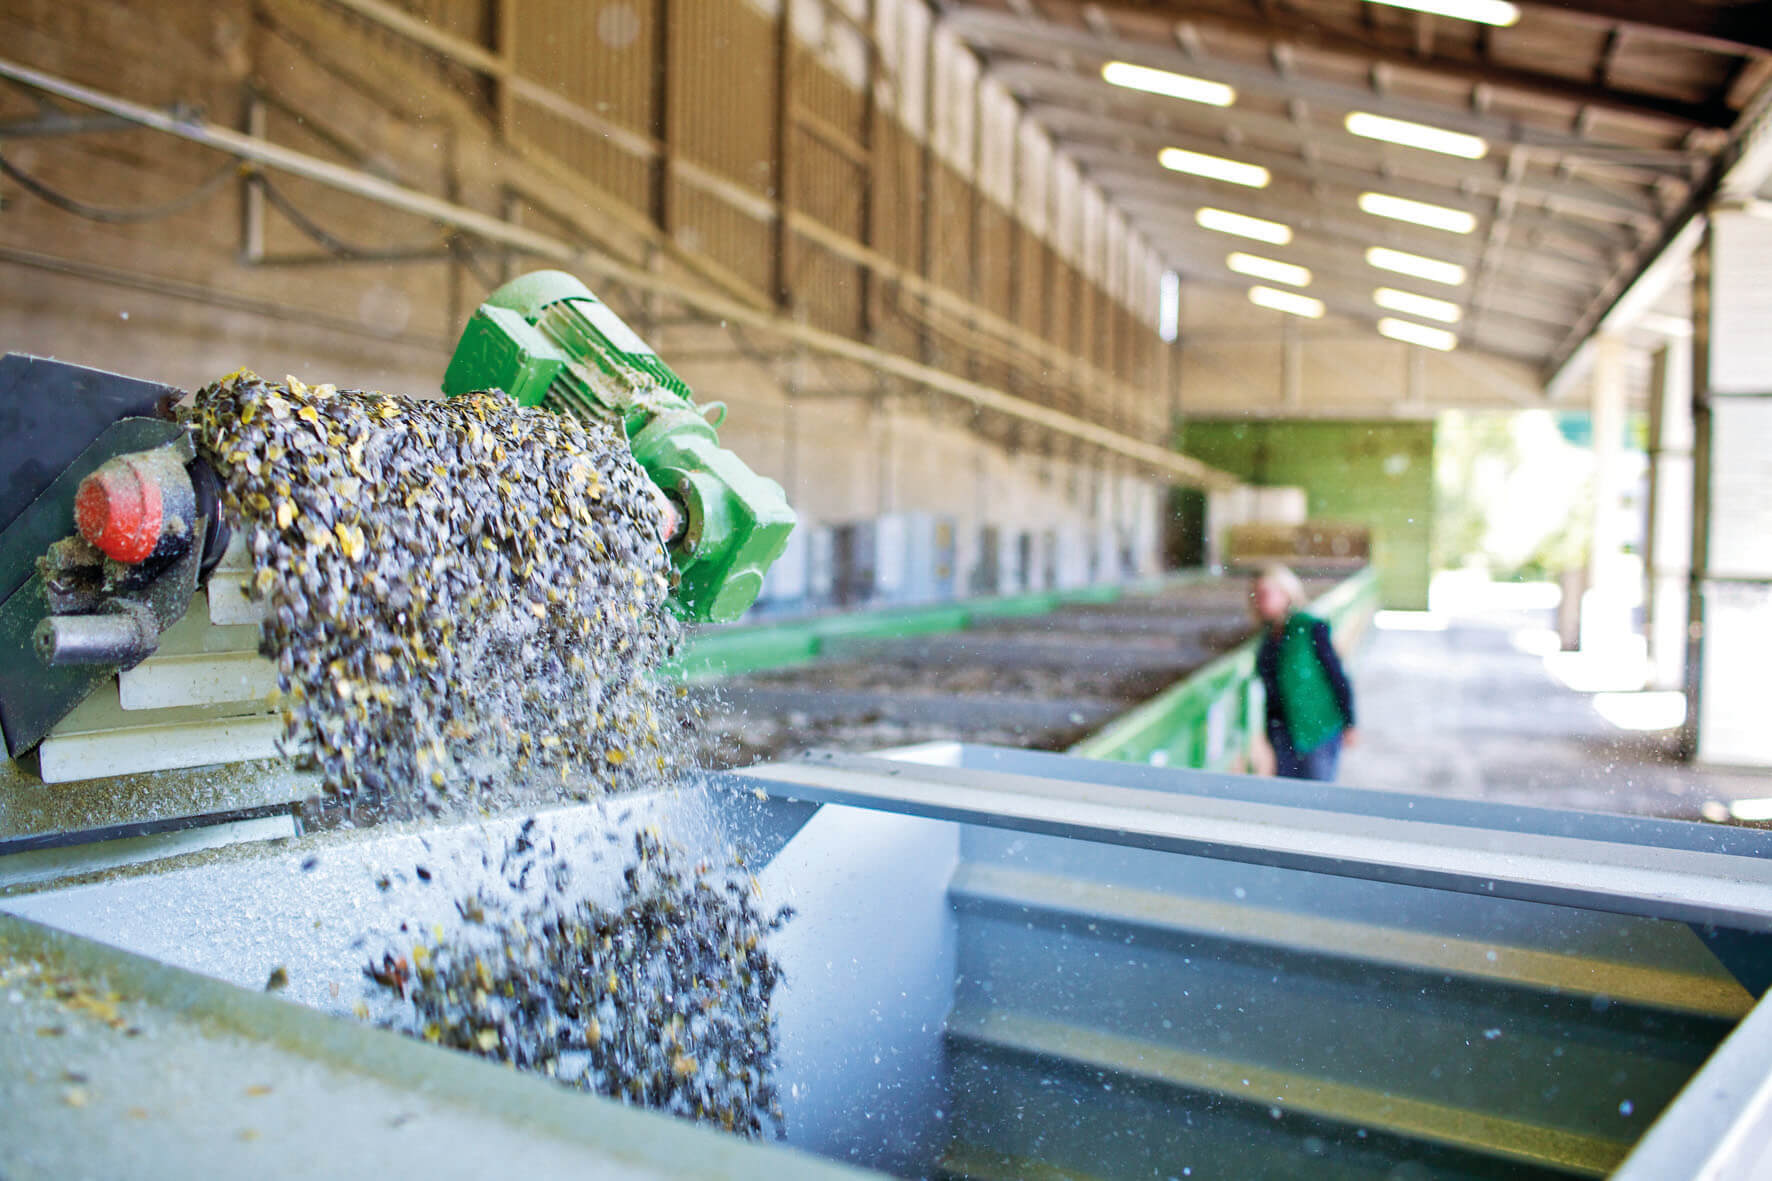 Drying plant for pumpkin seeds - seeds fall from the conveyor belt into the container